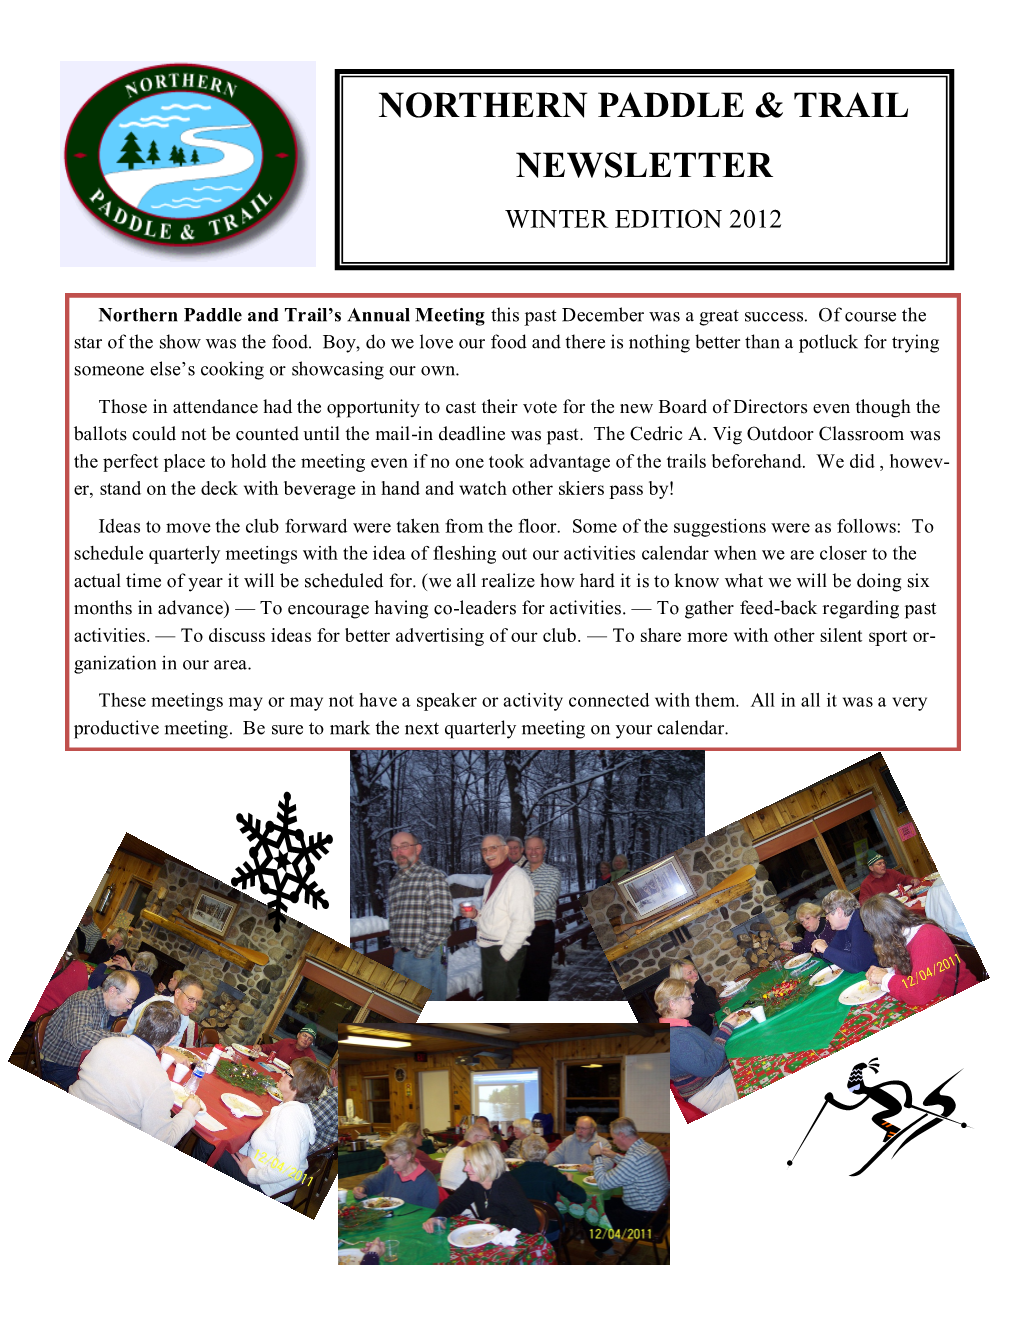 Northern Paddle & Trail Newsletter